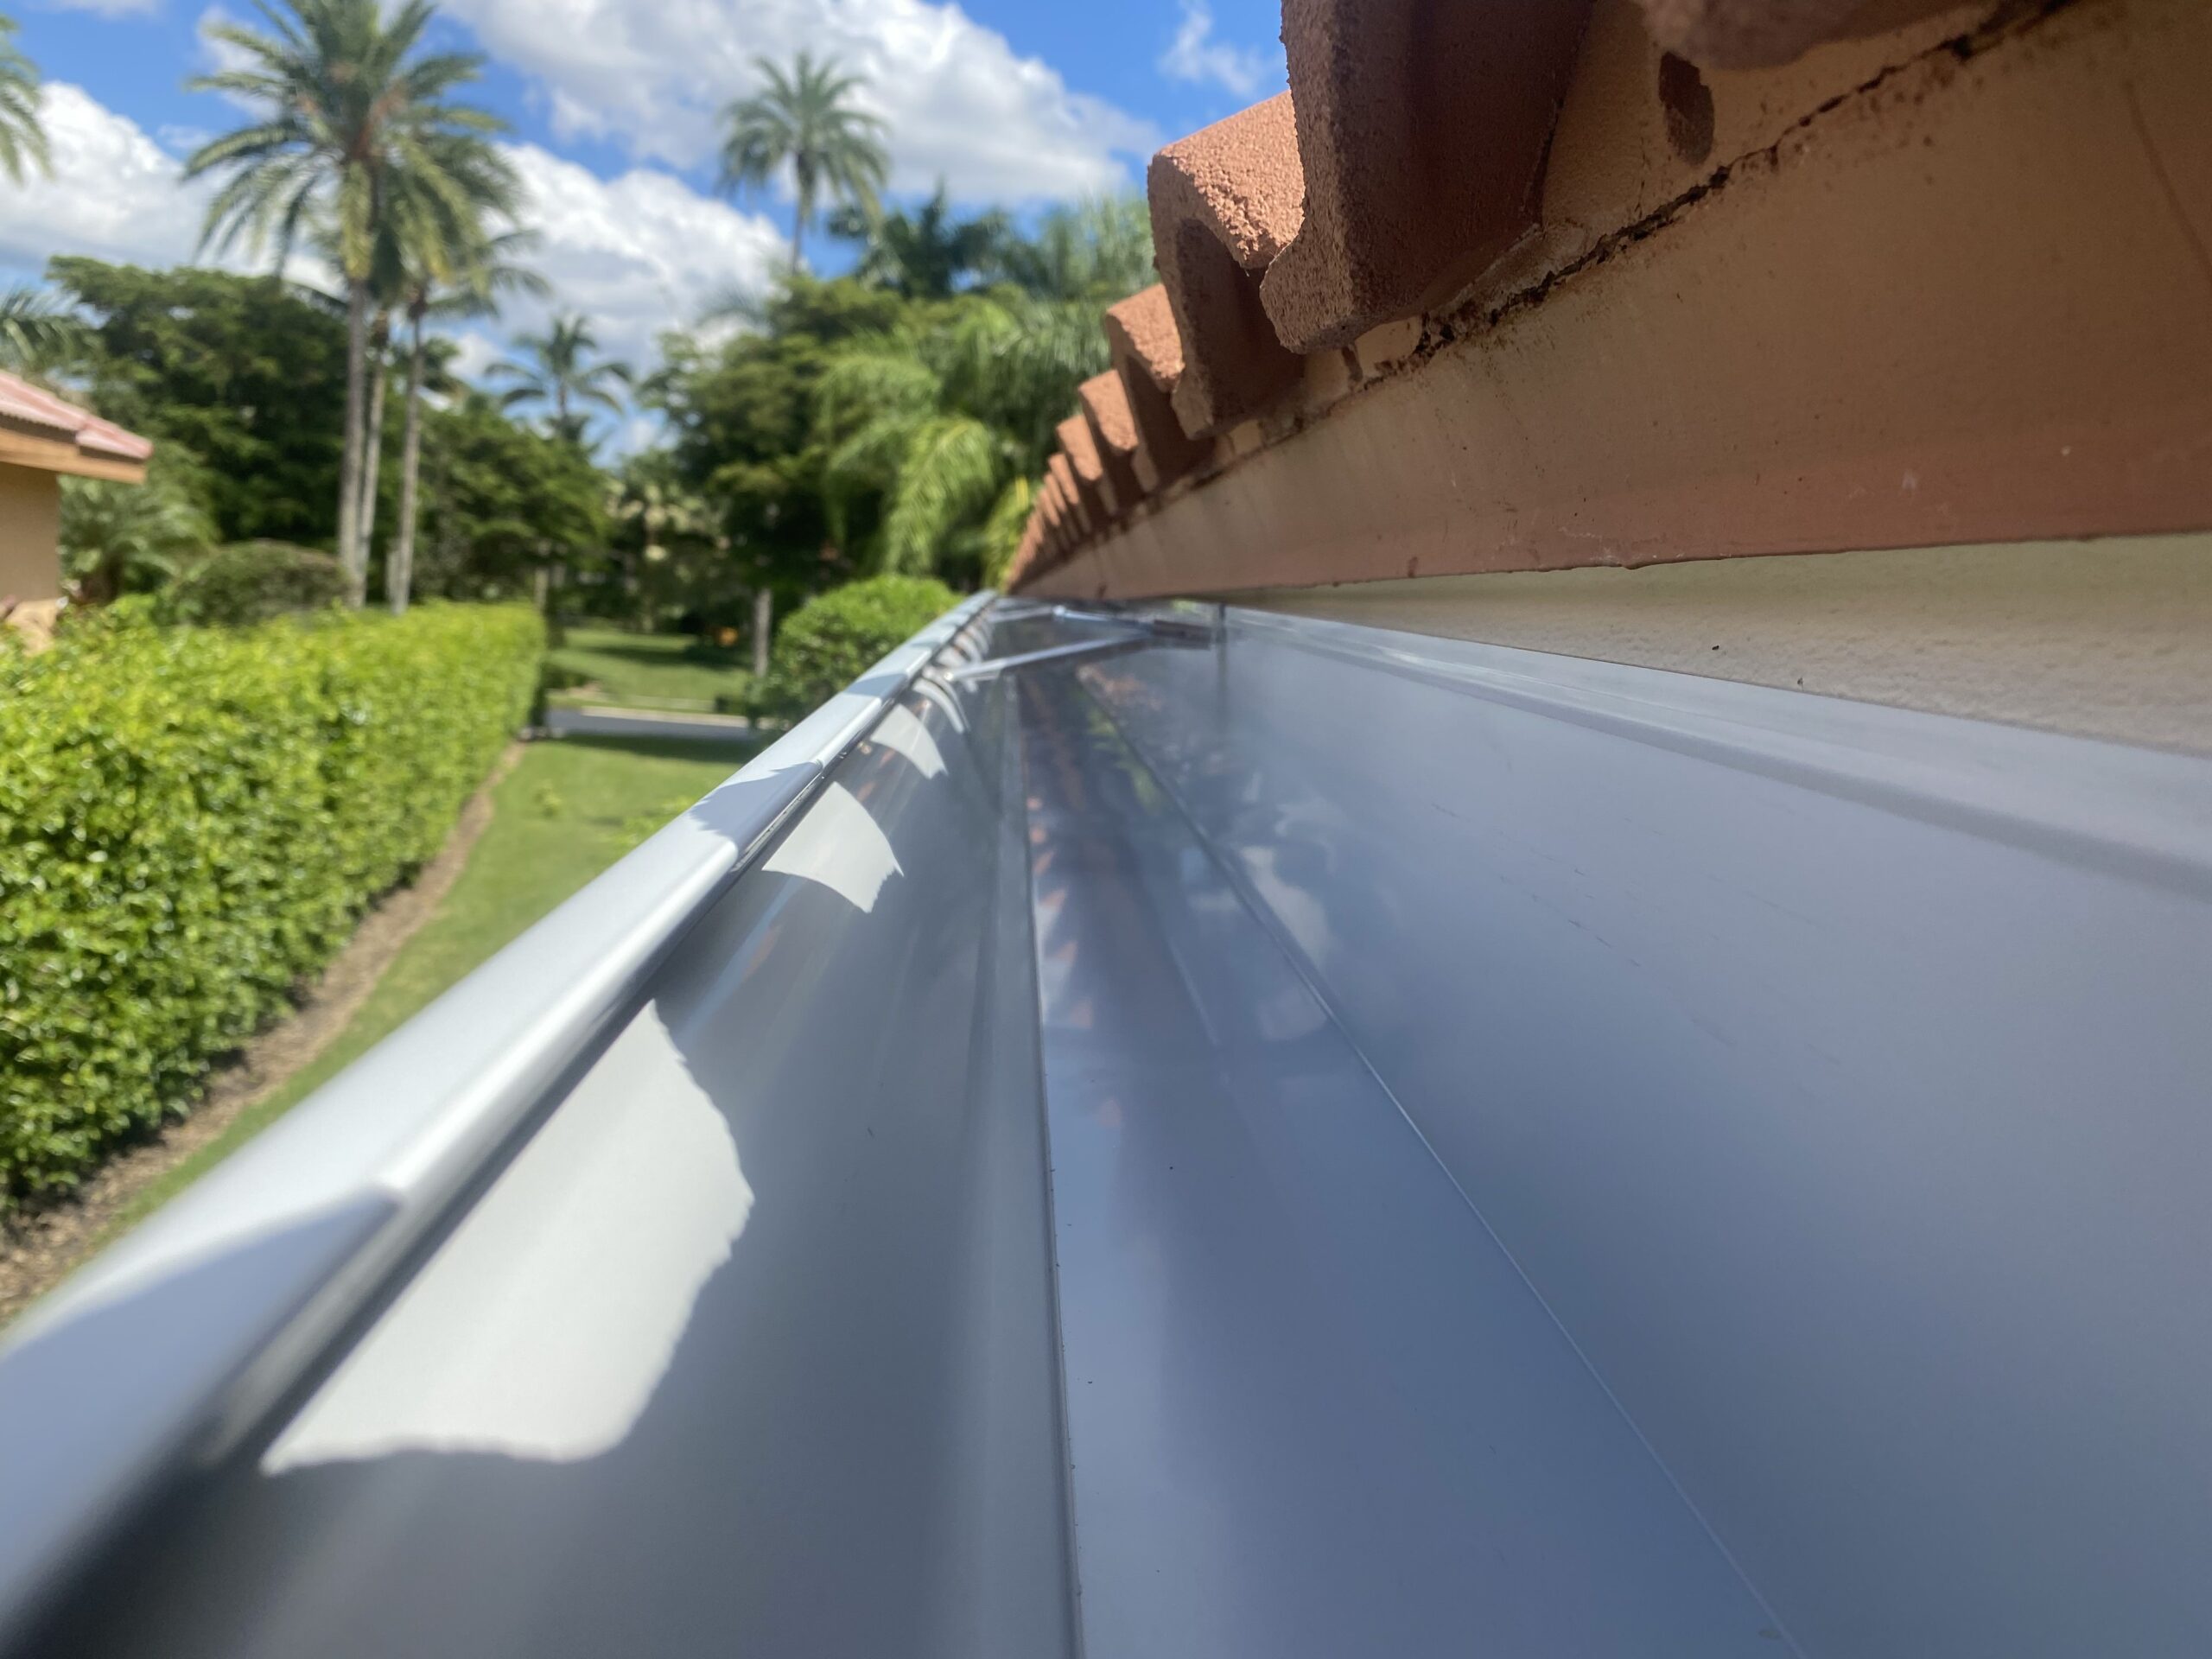 Factors to Consider When Choosing Gutter Colors and Materials